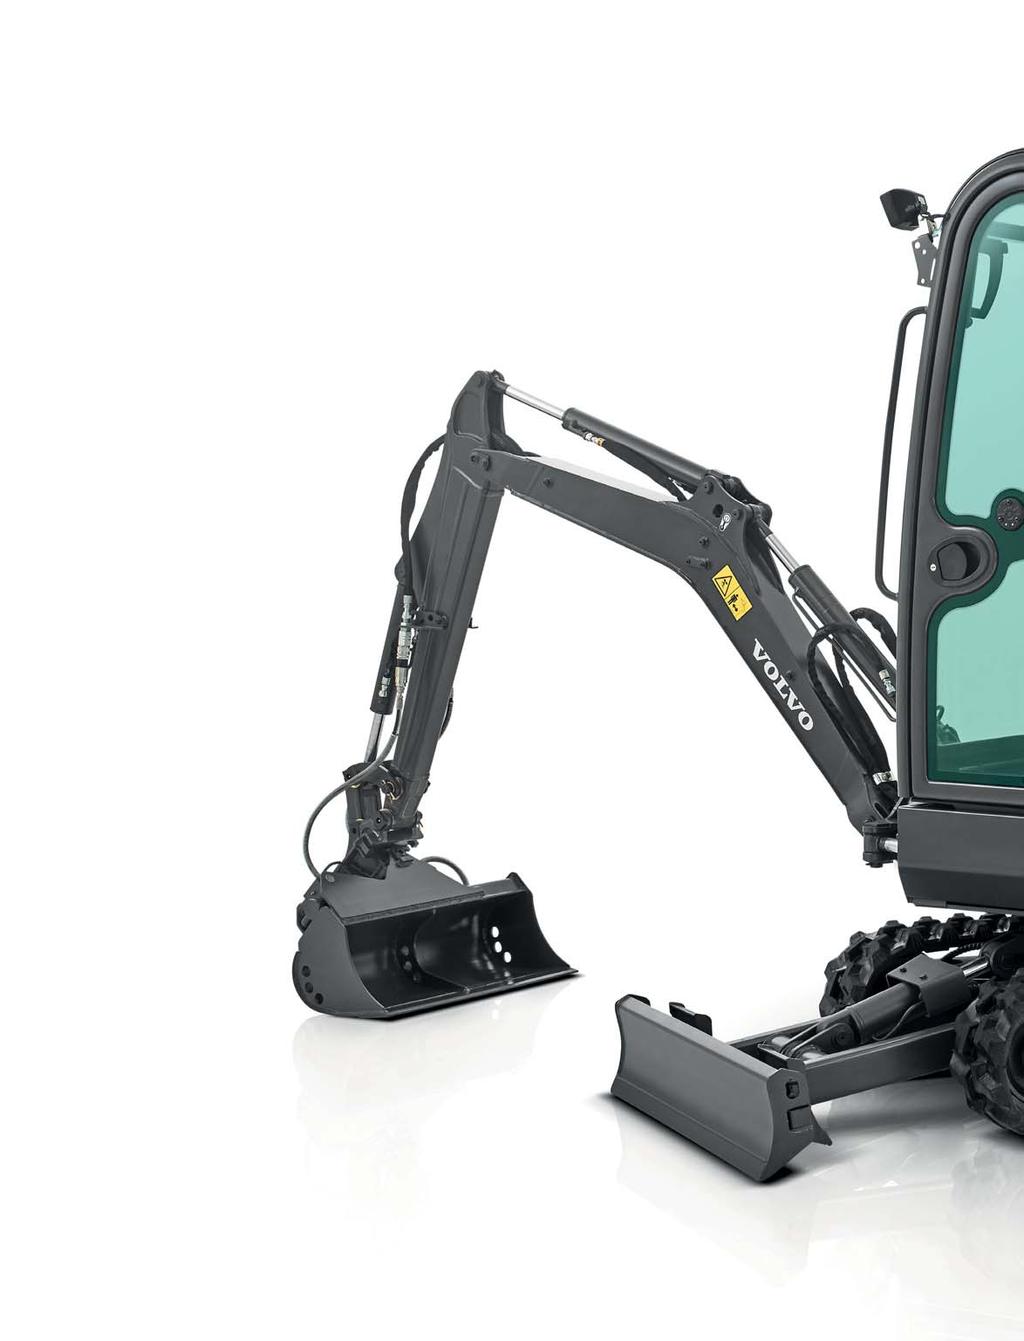 Durable by design Superior operator environment Ergonomic, spacious and safe Volvo cab/canopy features all round visibility, intuitive controls and built in comfort.